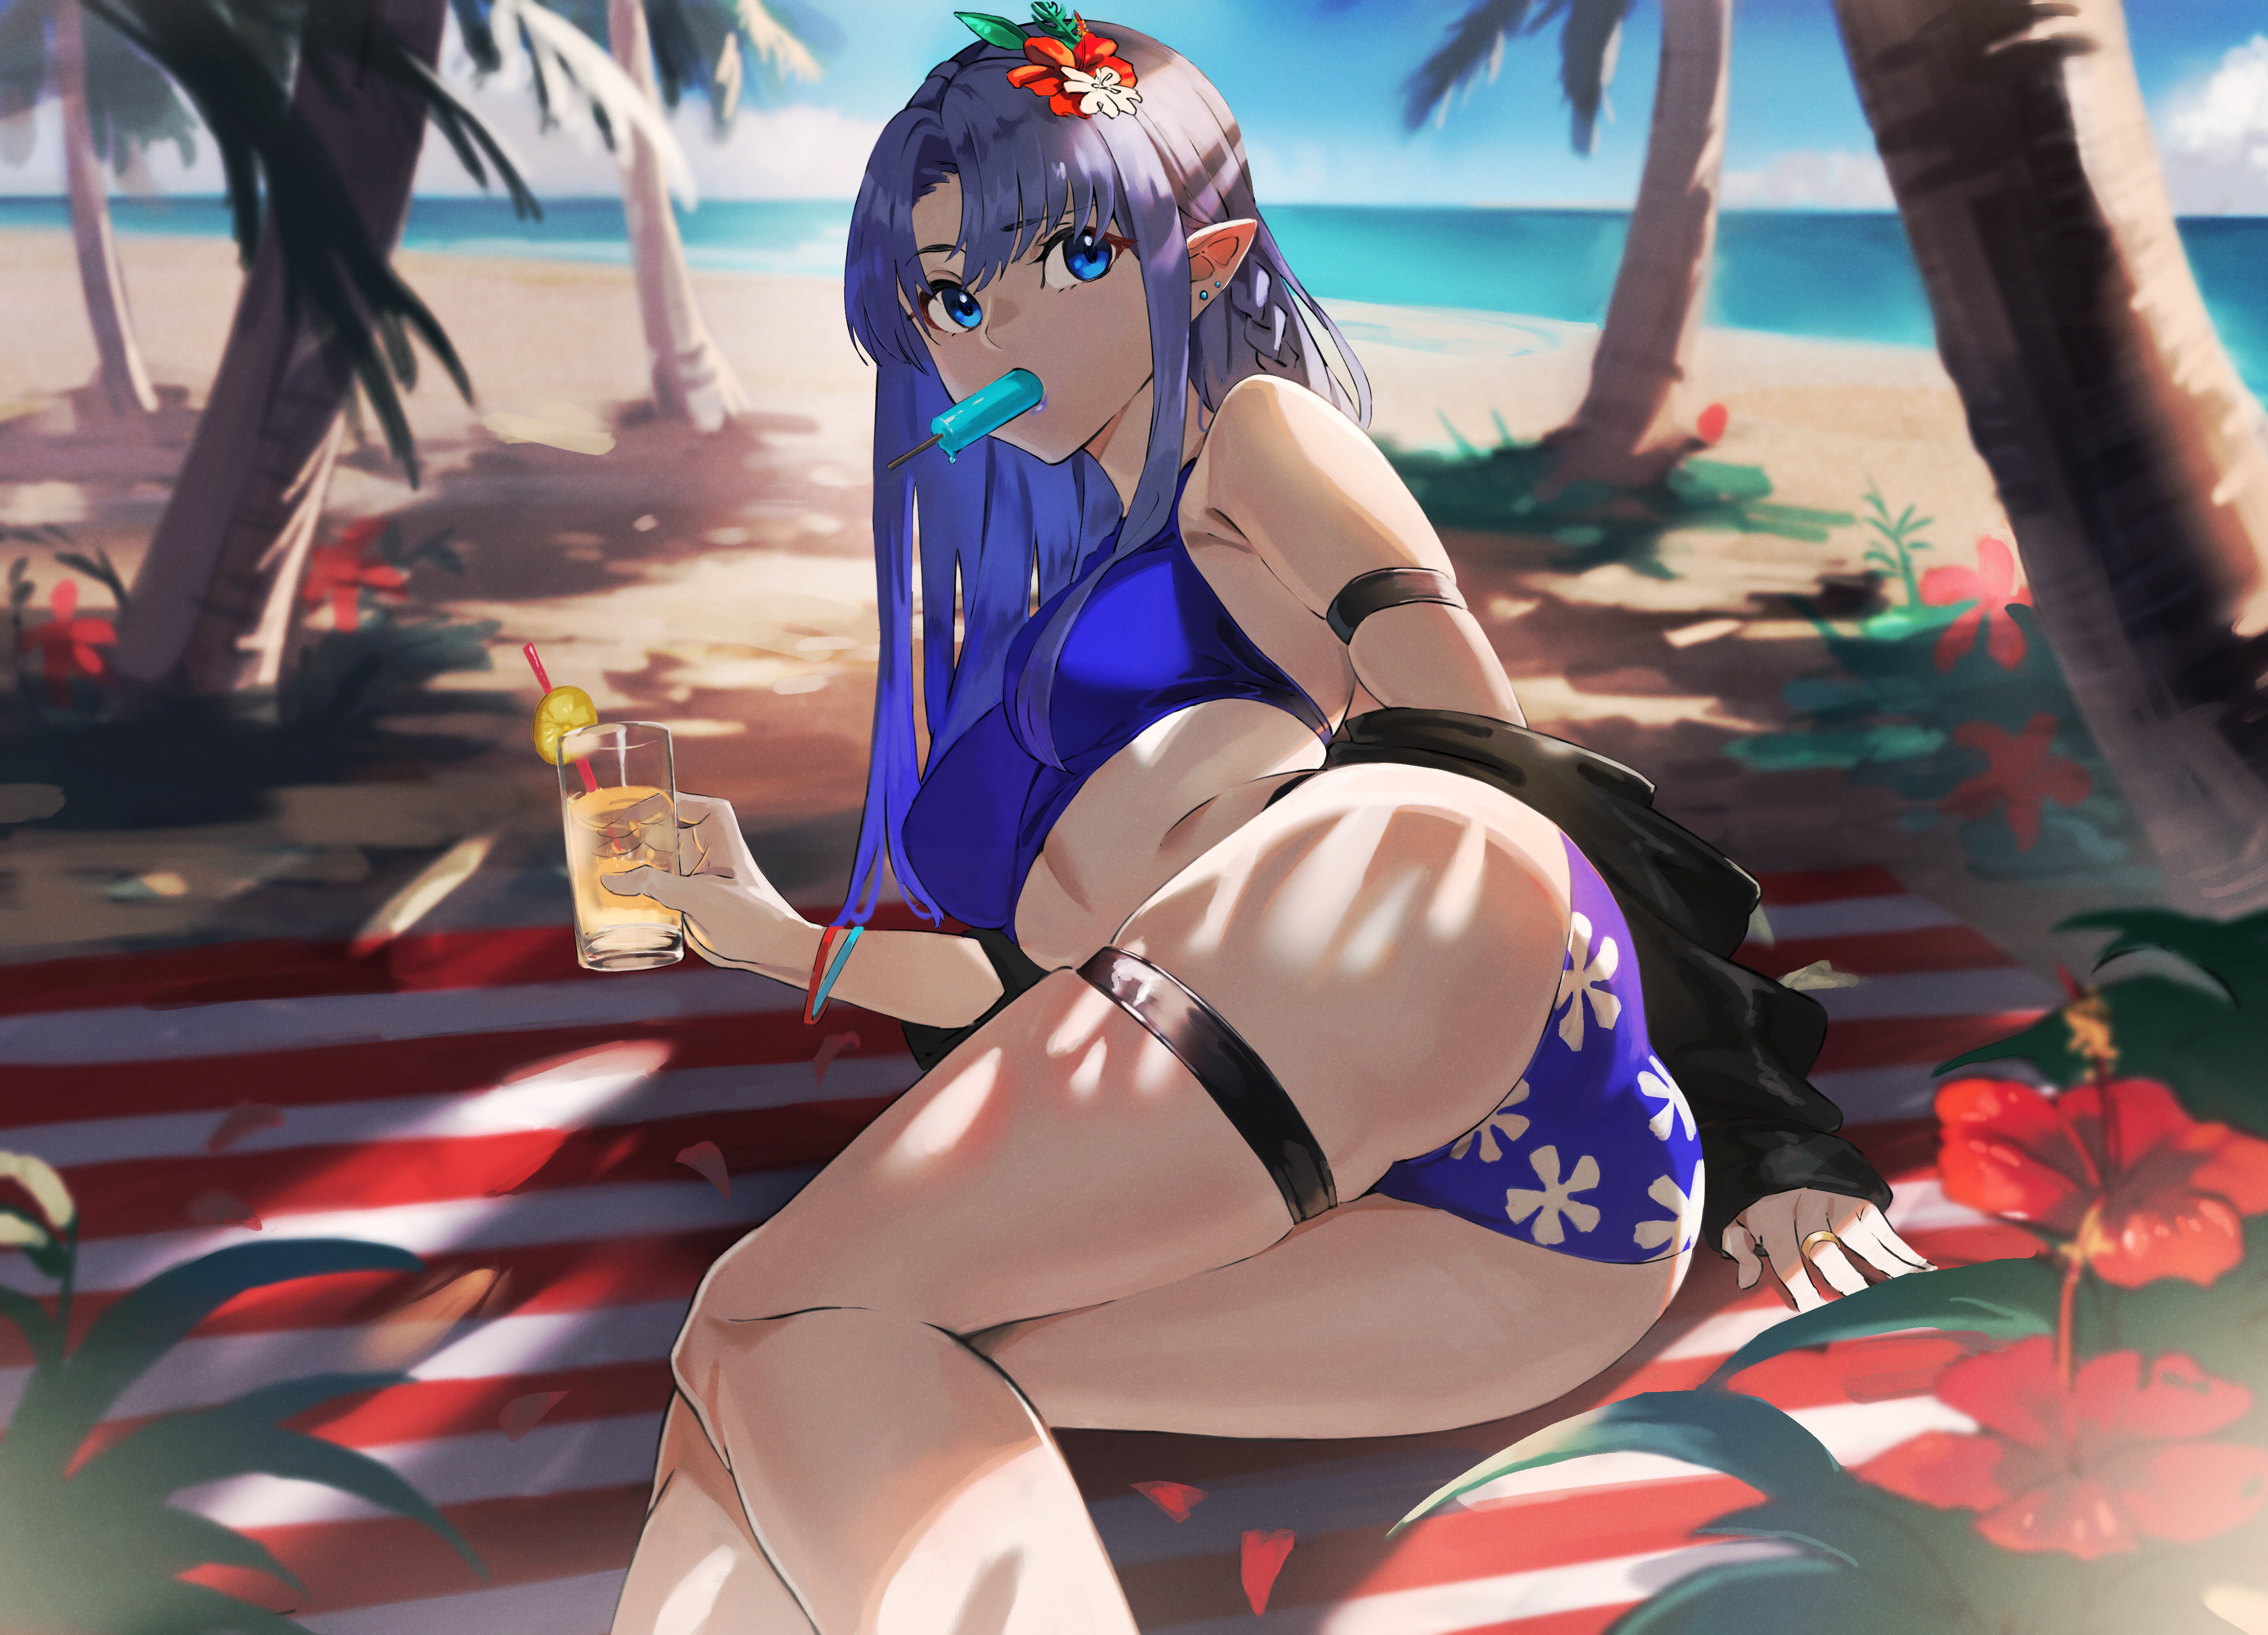 Anime 4014x2894 anime anime girls bikini ice cream beach lying on side ass Fate/Grand Order Caster (Fate/Stay Night) Lemonade blue eyes blue hair pointy ears Fate series Medea Lily (Fate/Grand Order) you-6-11 hibiscus palm trees cocktails looking back